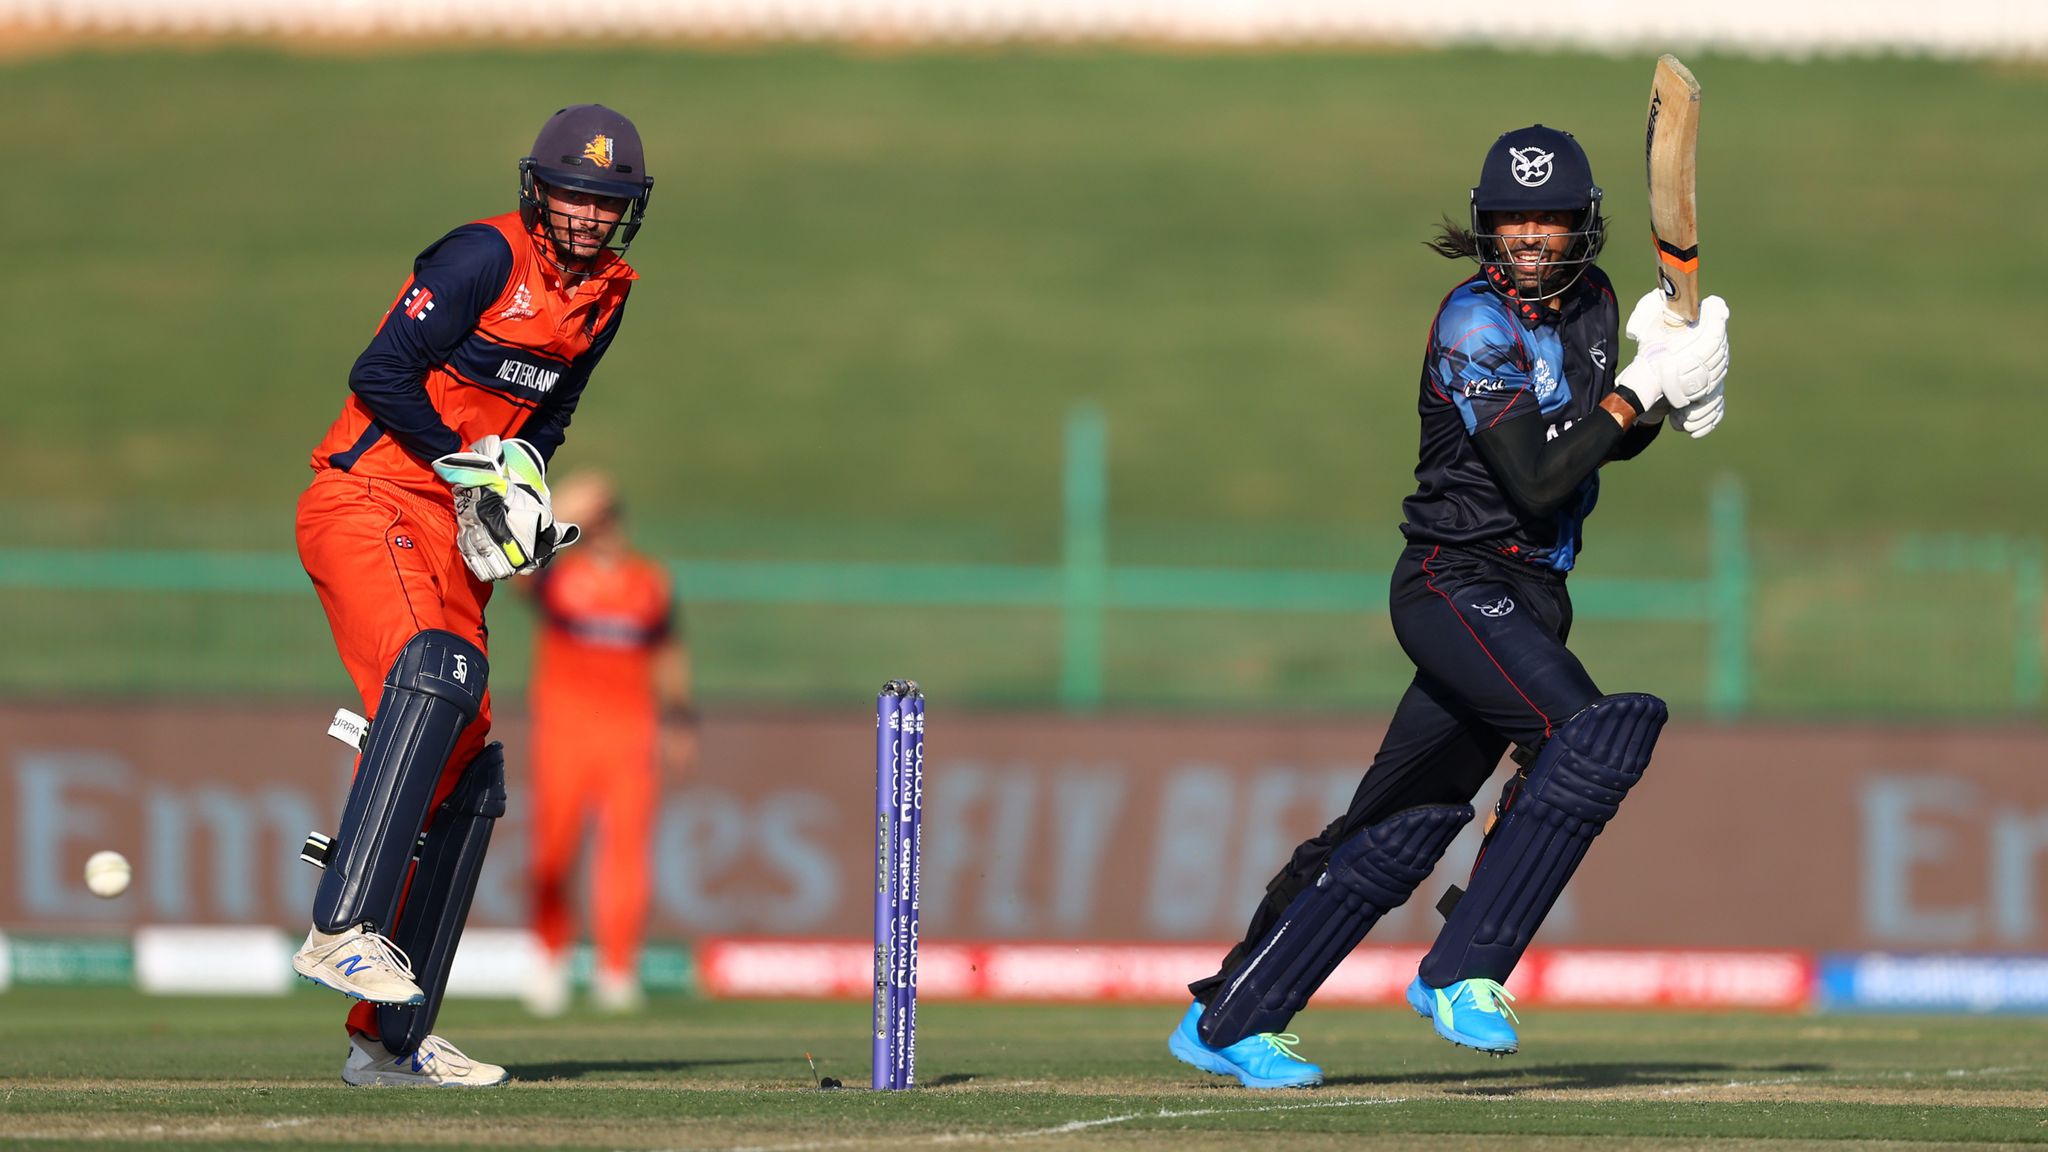 David Wiese delivers as Namibia stun Netherlands to clinch their first-ever World Cup win | Cricket News | Sky Sports